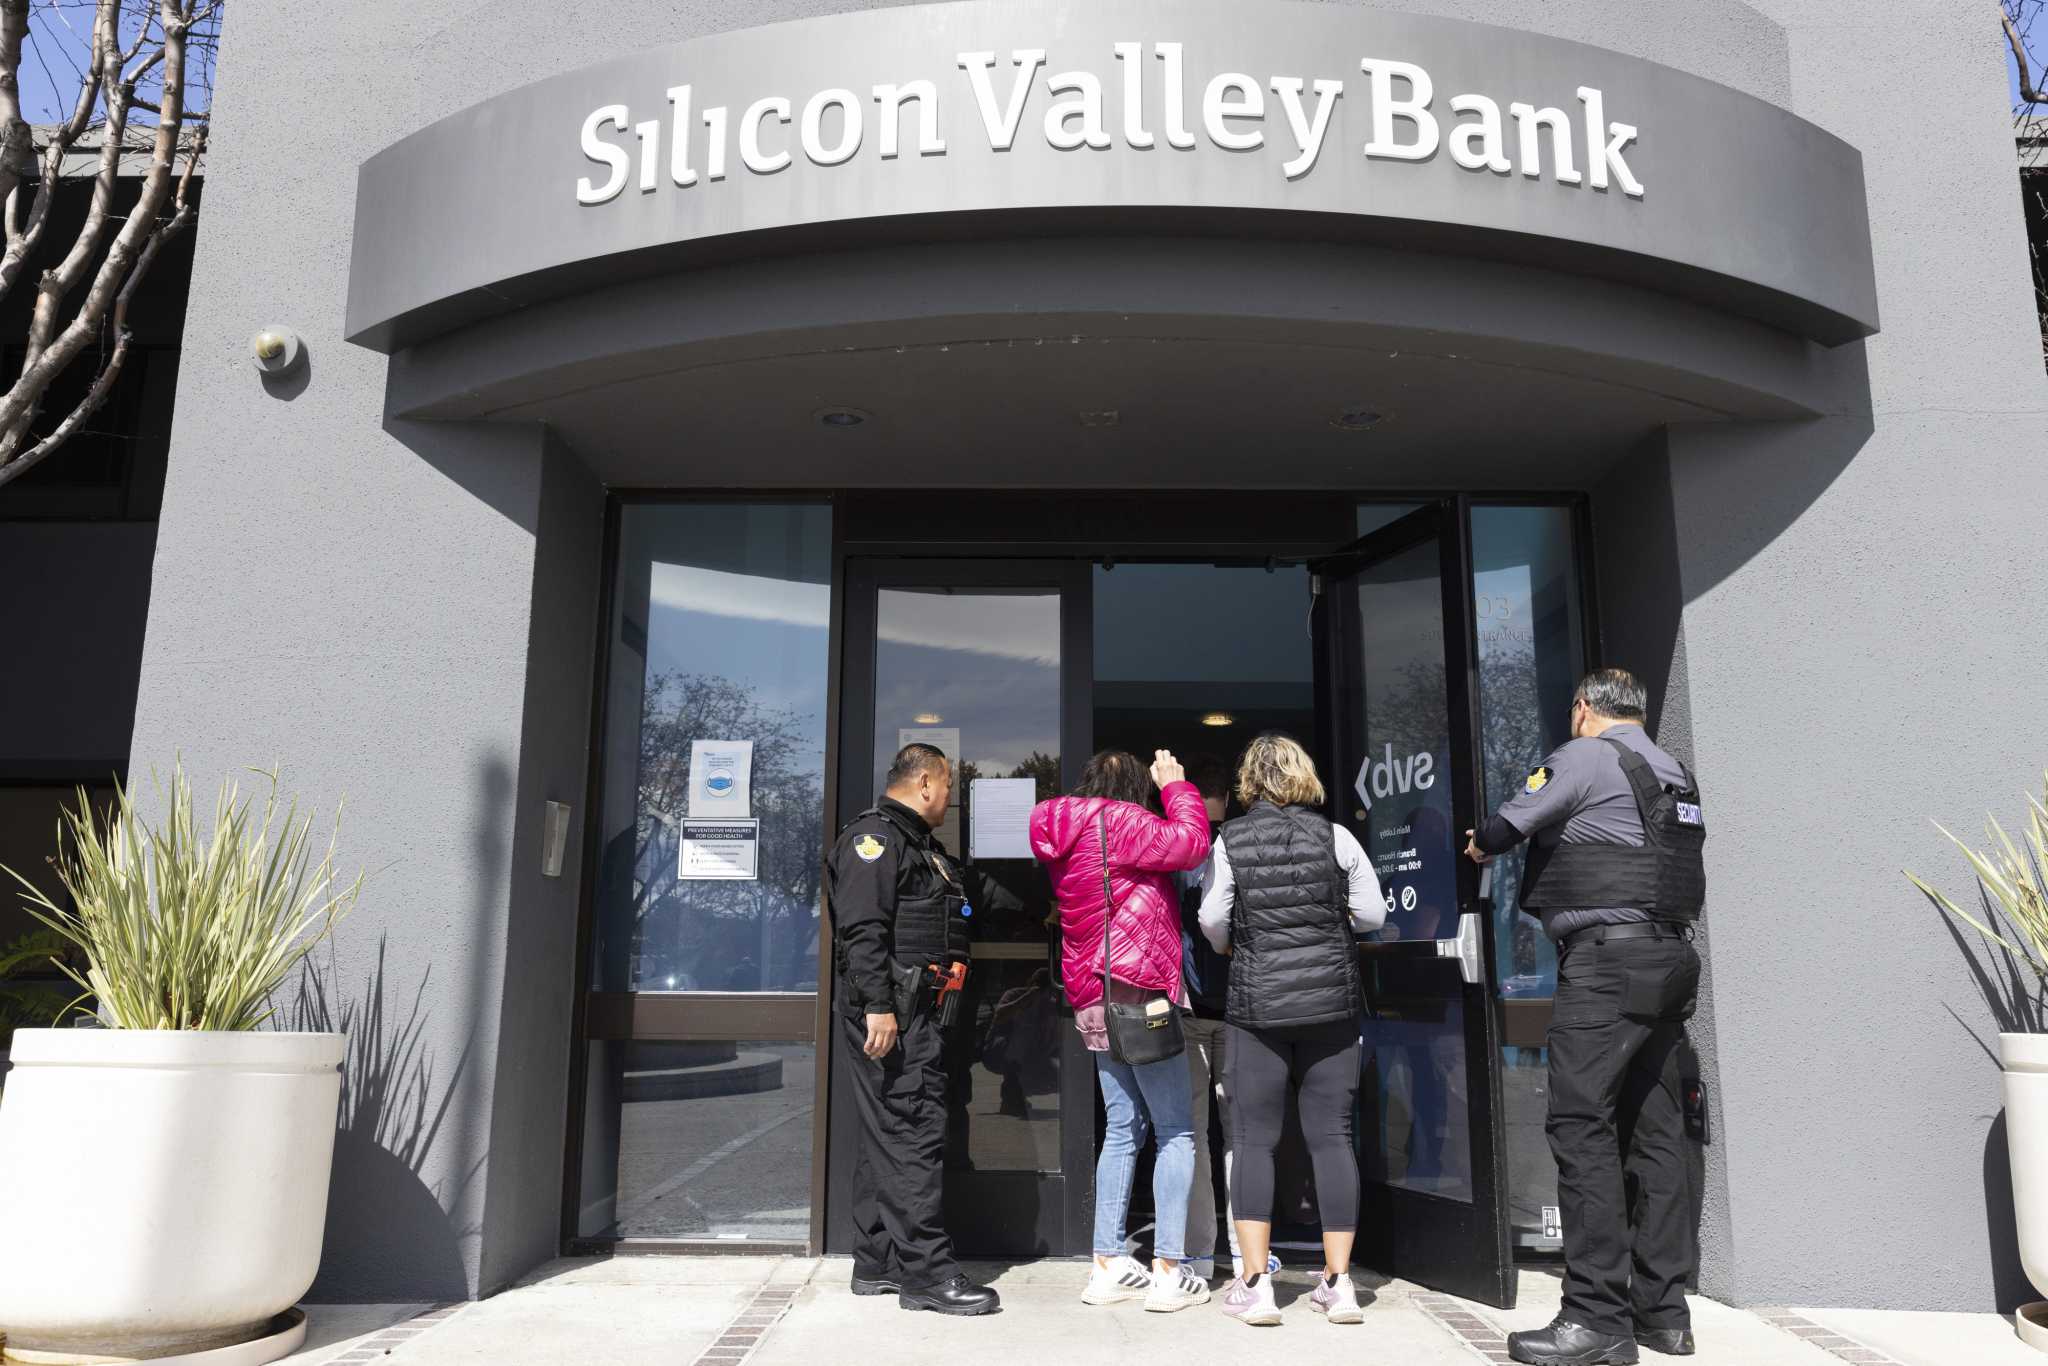 CT resident among those on Silicon Valley Bank’s board of directors